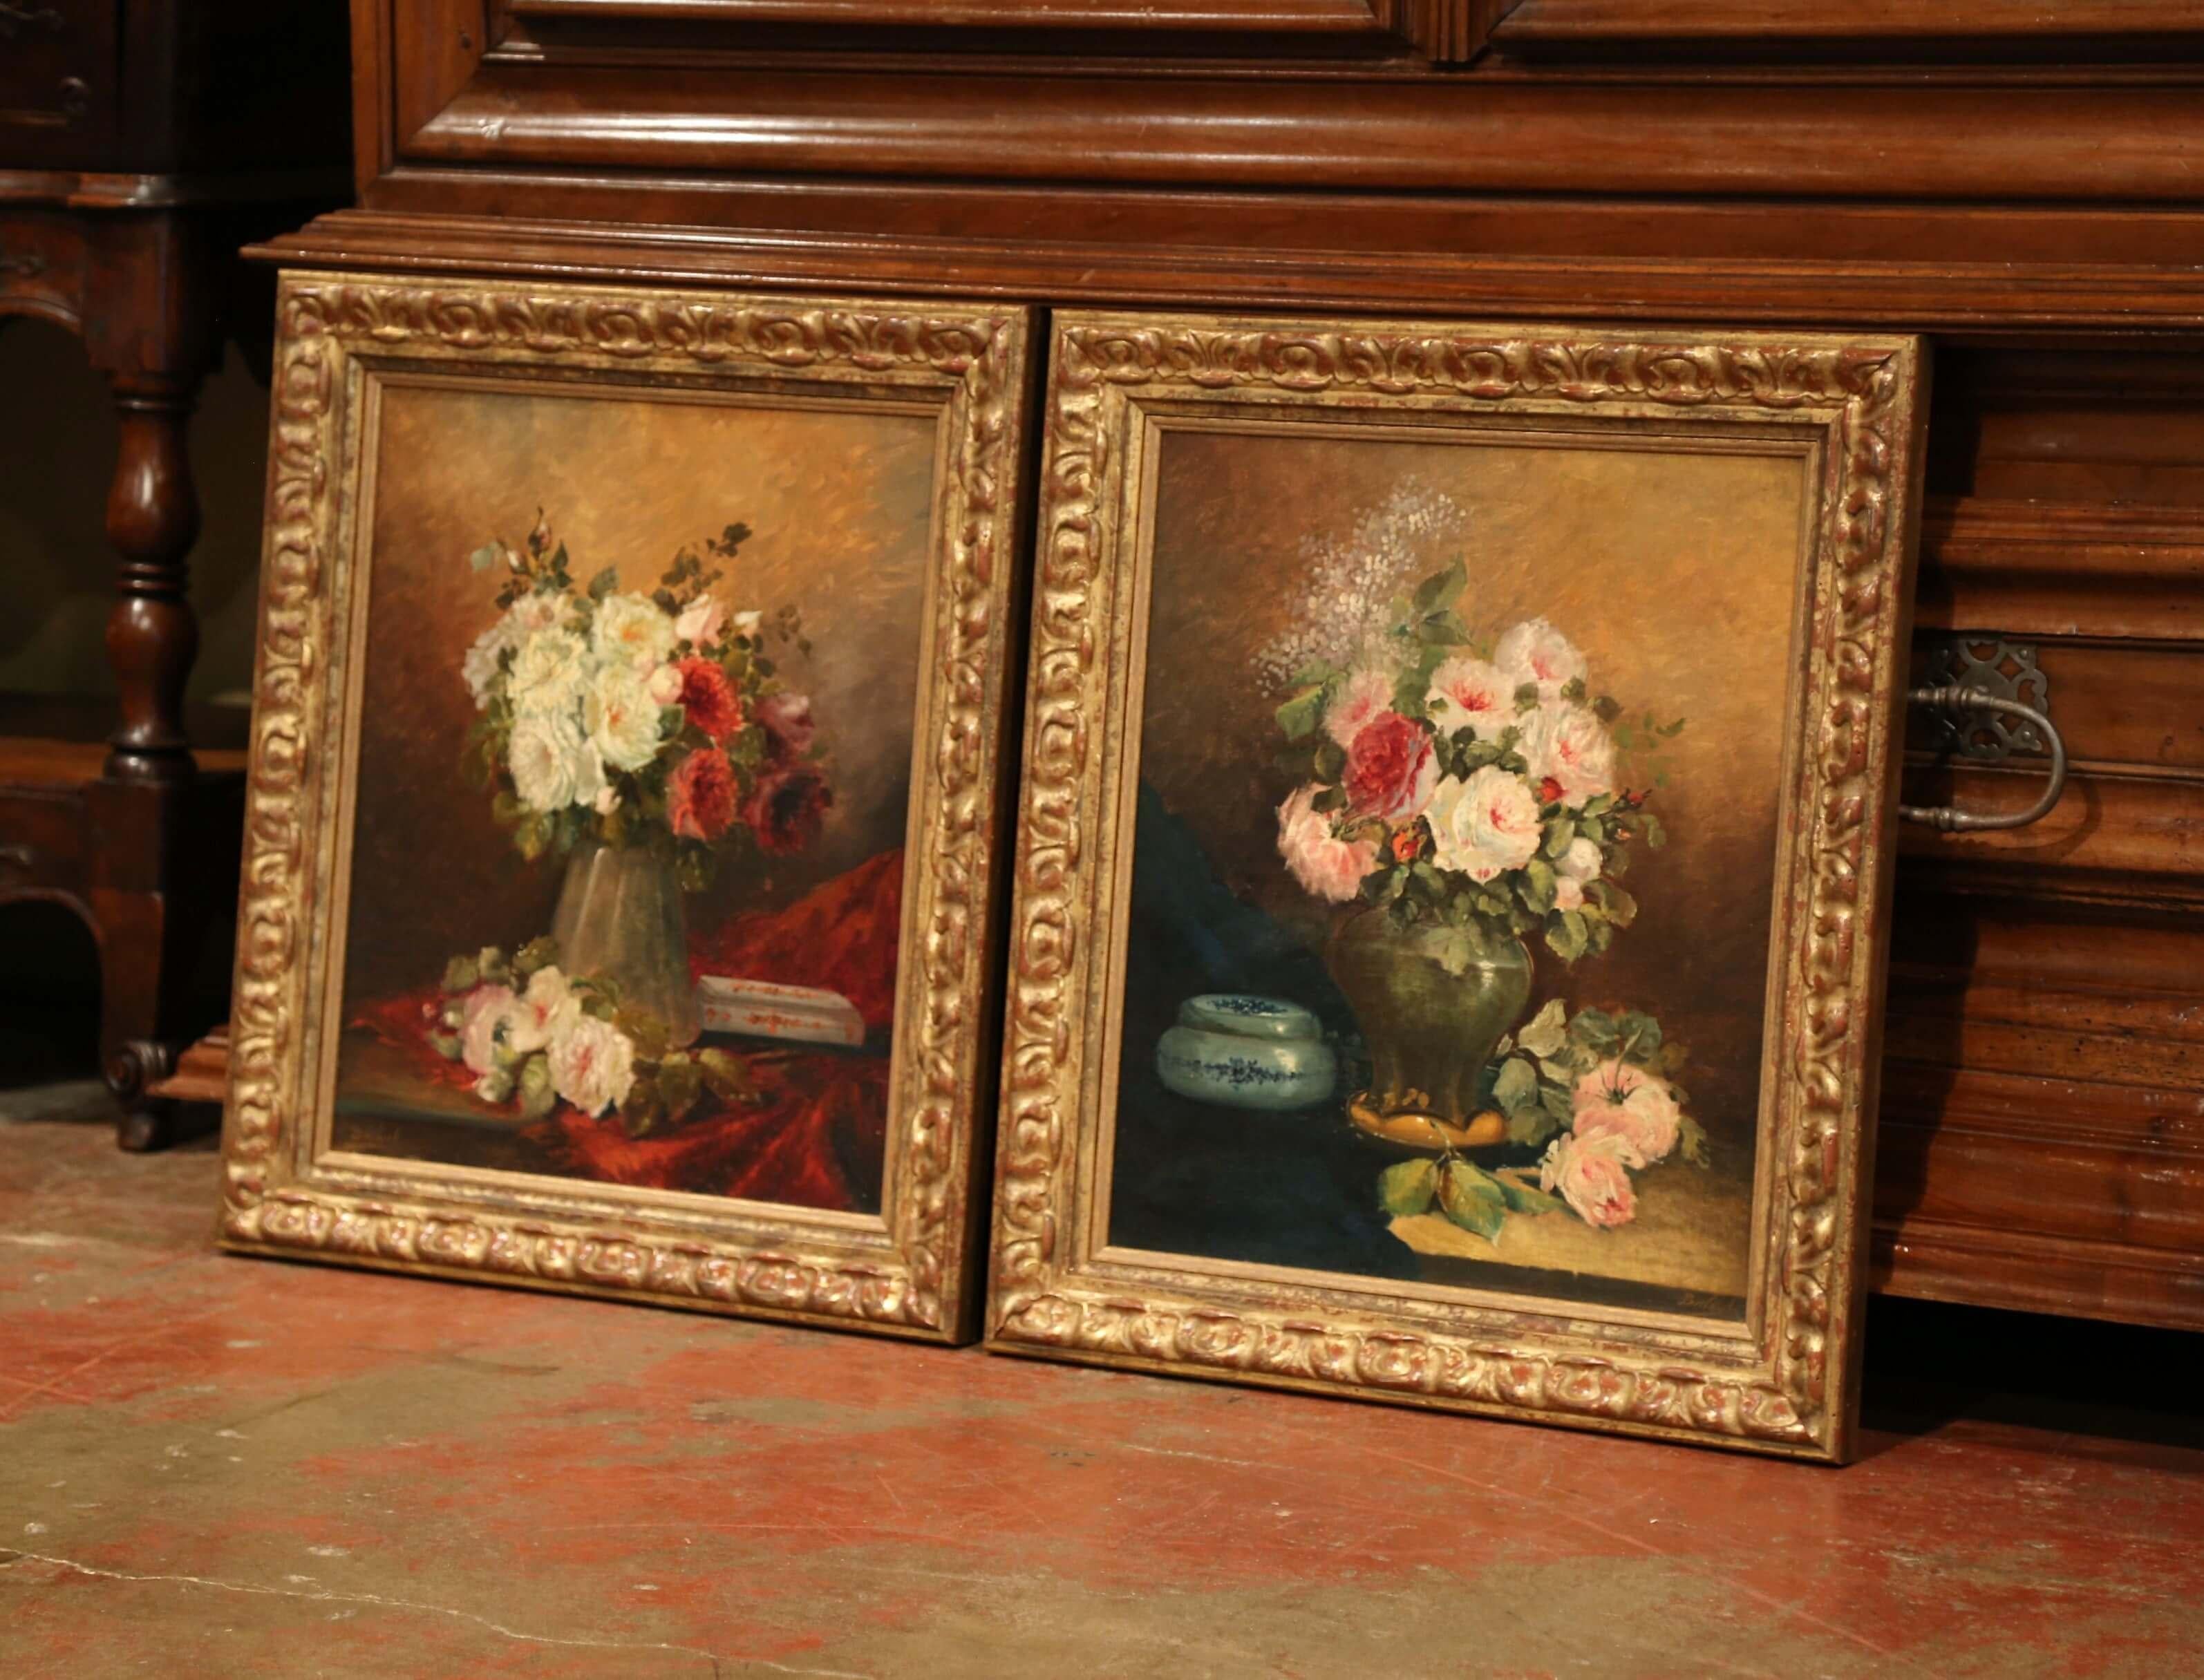 Invite color into your home with this traditional pair of antique, floral paintings. The paintings were crafted in France circa 1870 and are set in carved gilt frames. Each canvas features a vase on a table filled with colorful flowers. The